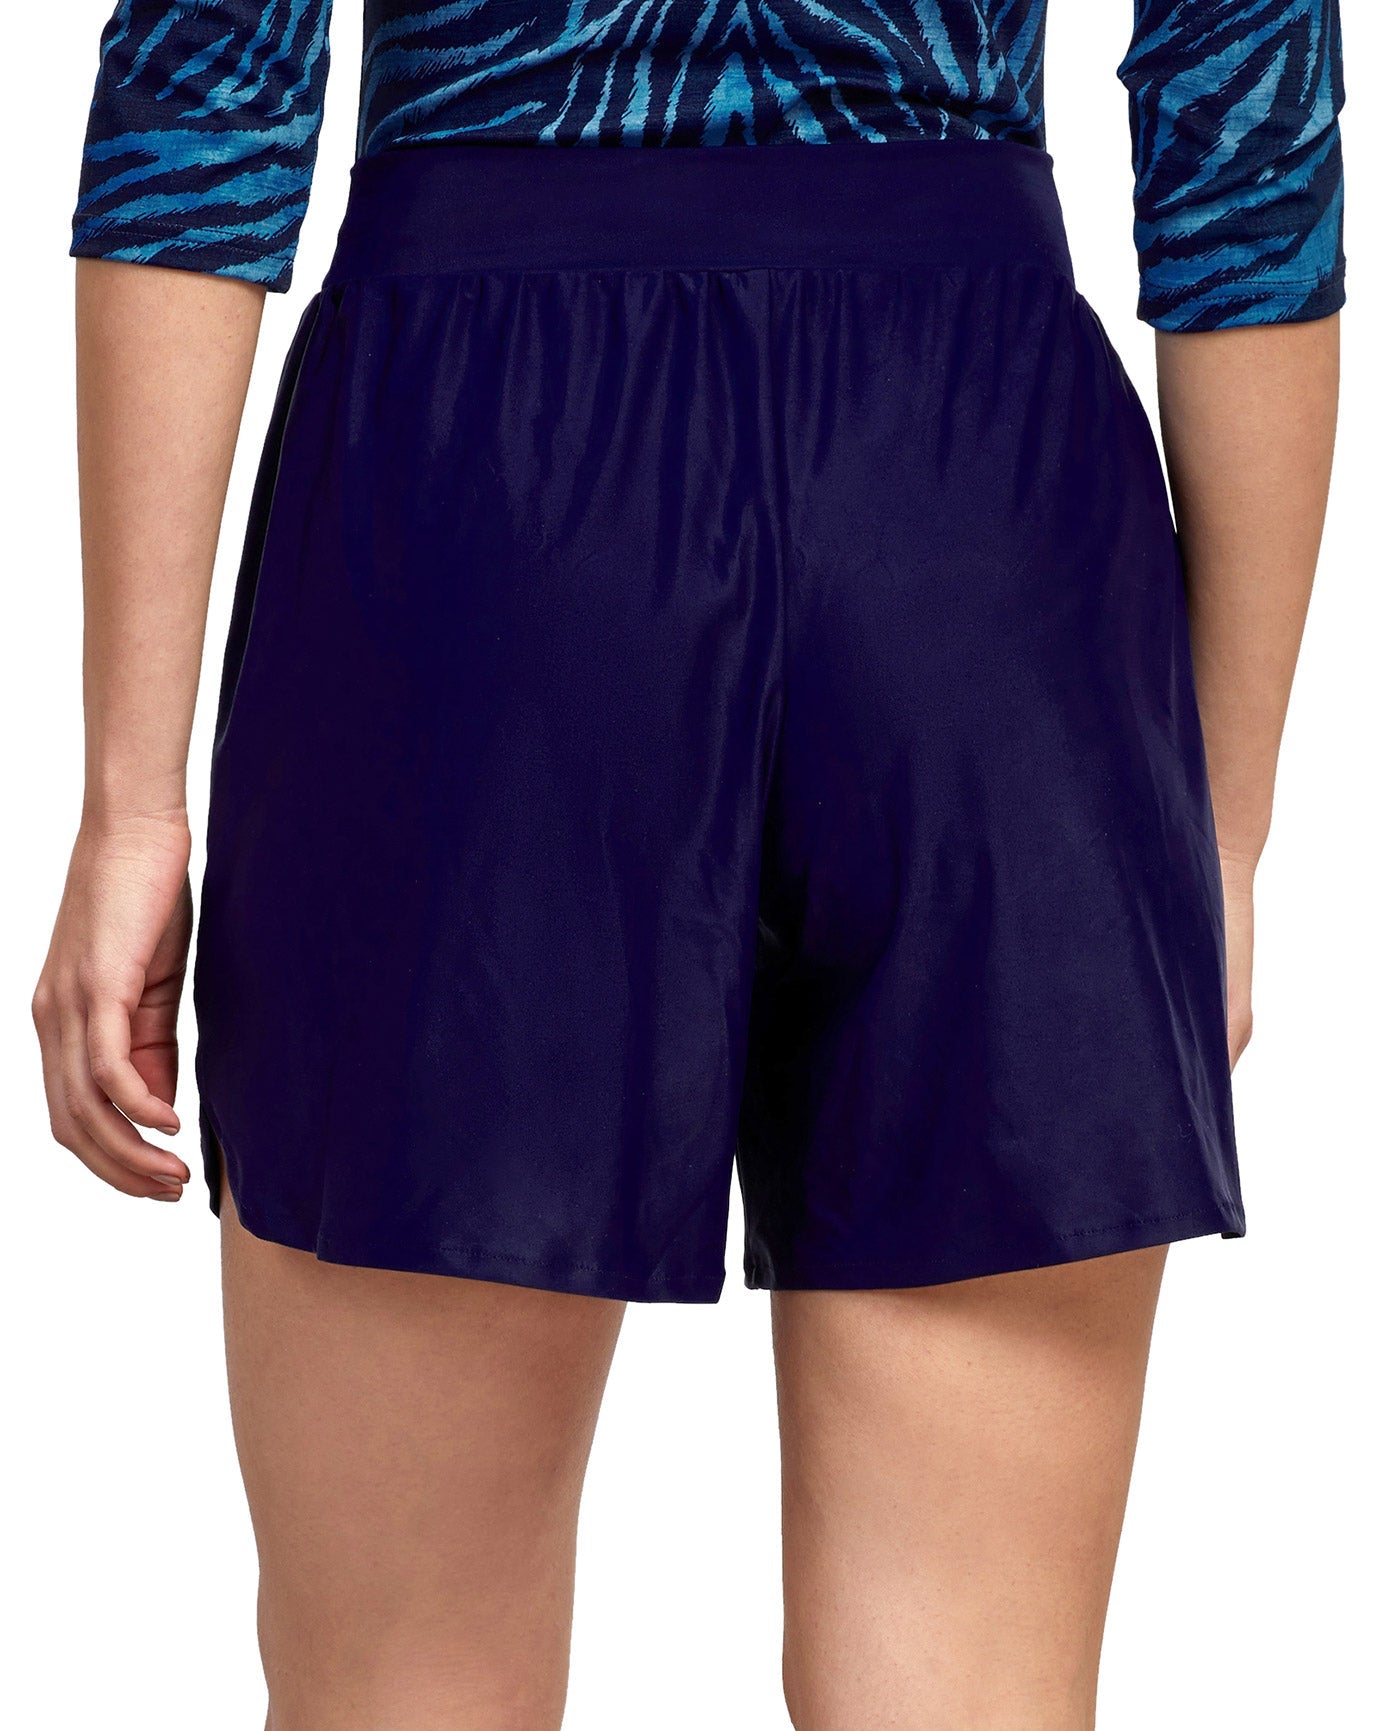 Back View Of Gottex Modest Cover Up Short Pants | GOTTEX MODEST ADMIRAL BLUE